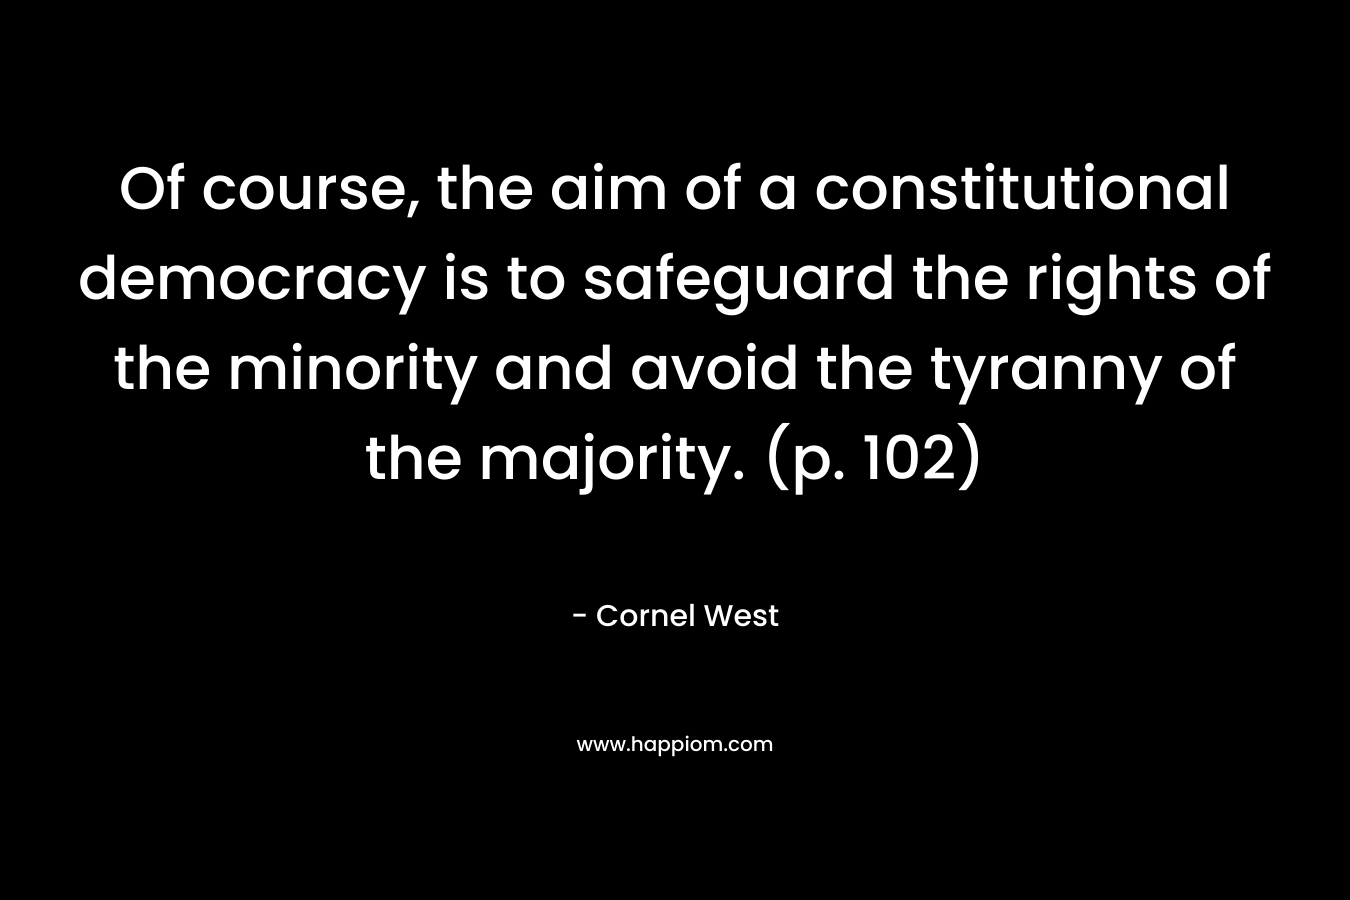 Of course, the aim of a constitutional democracy is to safeguard the rights of the minority and avoid the tyranny of the majority. (p. 102) – Cornel West